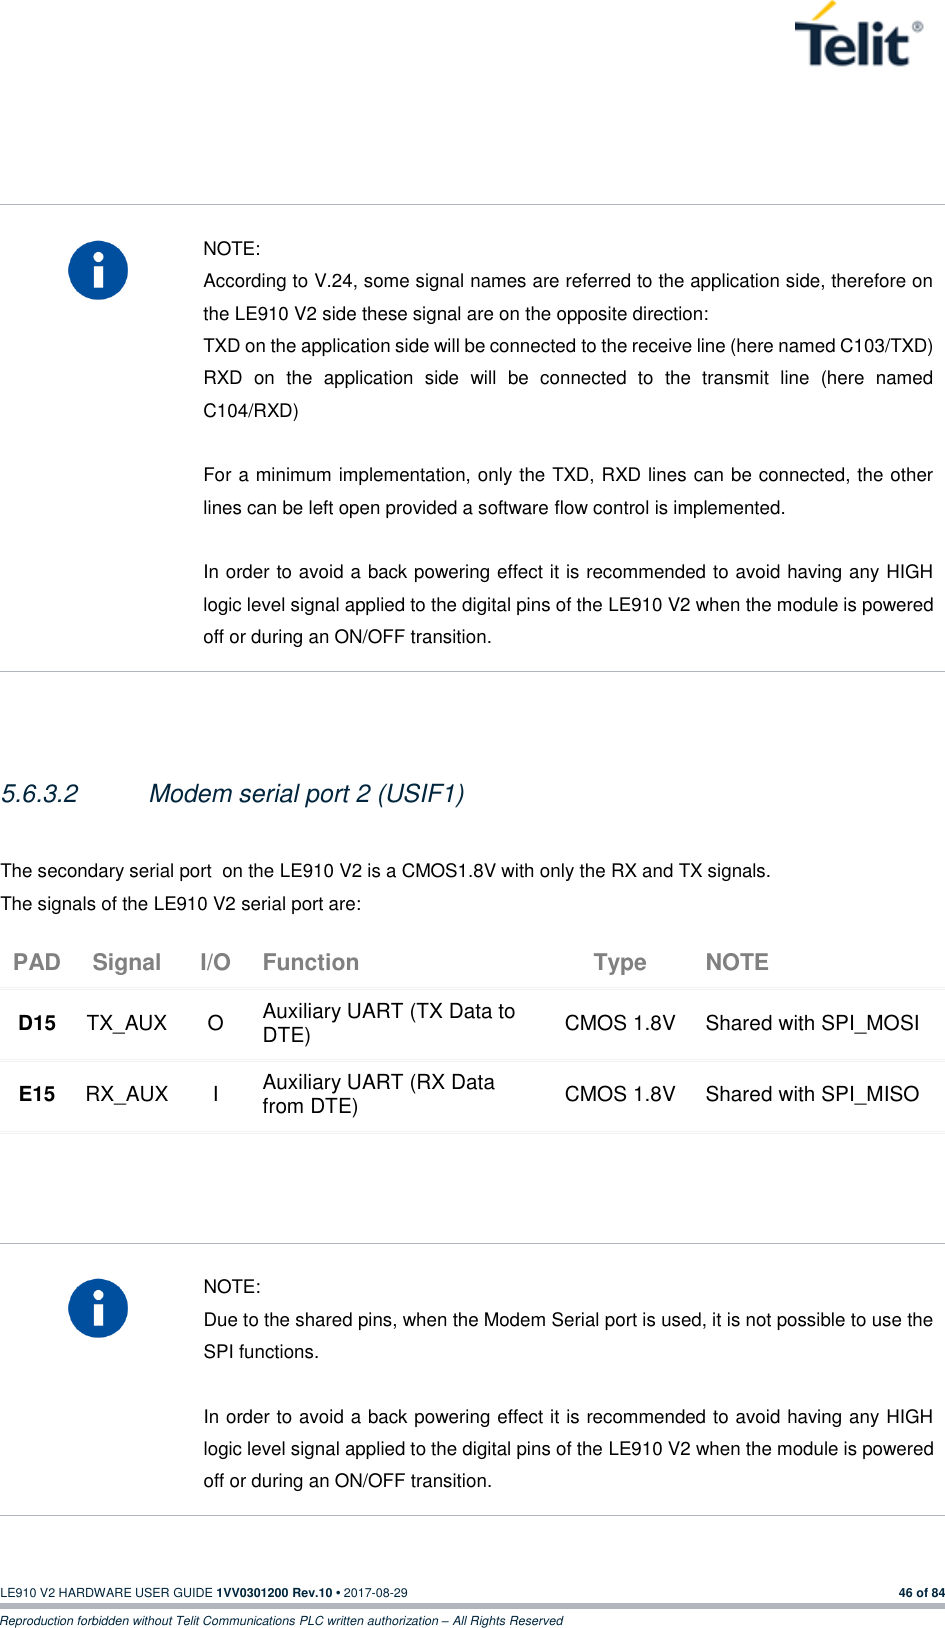   LE910 V2 HARDWARE USER GUIDE 1VV0301200 Rev.10 • 2017-08-29  46 of 84 Reproduction forbidden without Telit Communications PLC written authorization – All Rights Reserved      NOTE: According to V.24, some signal names are referred to the application side, therefore on the LE910 V2 side these signal are on the opposite direction:  TXD on the application side will be connected to the receive line (here named C103/TXD) RXD  on  the  application  side  will  be  connected  to  the  transmit  line  (here  named C104/RXD)  For a minimum implementation, only the TXD, RXD lines can be connected, the other lines can be left open provided a software flow control is implemented.  In order to avoid a back powering effect it is recommended to avoid having any HIGH logic level signal applied to the digital pins of the LE910 V2 when the module is powered off or during an ON/OFF transition.   5.6.3.2  Modem serial port 2 (USIF1)  The secondary serial port  on the LE910 V2 is a CMOS1.8V with only the RX and TX signals.  The signals of the LE910 V2 serial port are: PAD Signal I/O Function Type NOTE D15 TX_AUX O Auxiliary UART (TX Data to DTE) CMOS 1.8V Shared with SPI_MOSI E15 RX_AUX I Auxiliary UART (RX Data from DTE) CMOS 1.8V Shared with SPI_MISO      NOTE: Due to the shared pins, when the Modem Serial port is used, it is not possible to use the SPI functions.  In order to avoid a back powering effect it is recommended to avoid having any HIGH logic level signal applied to the digital pins of the LE910 V2 when the module is powered off or during an ON/OFF transition.  